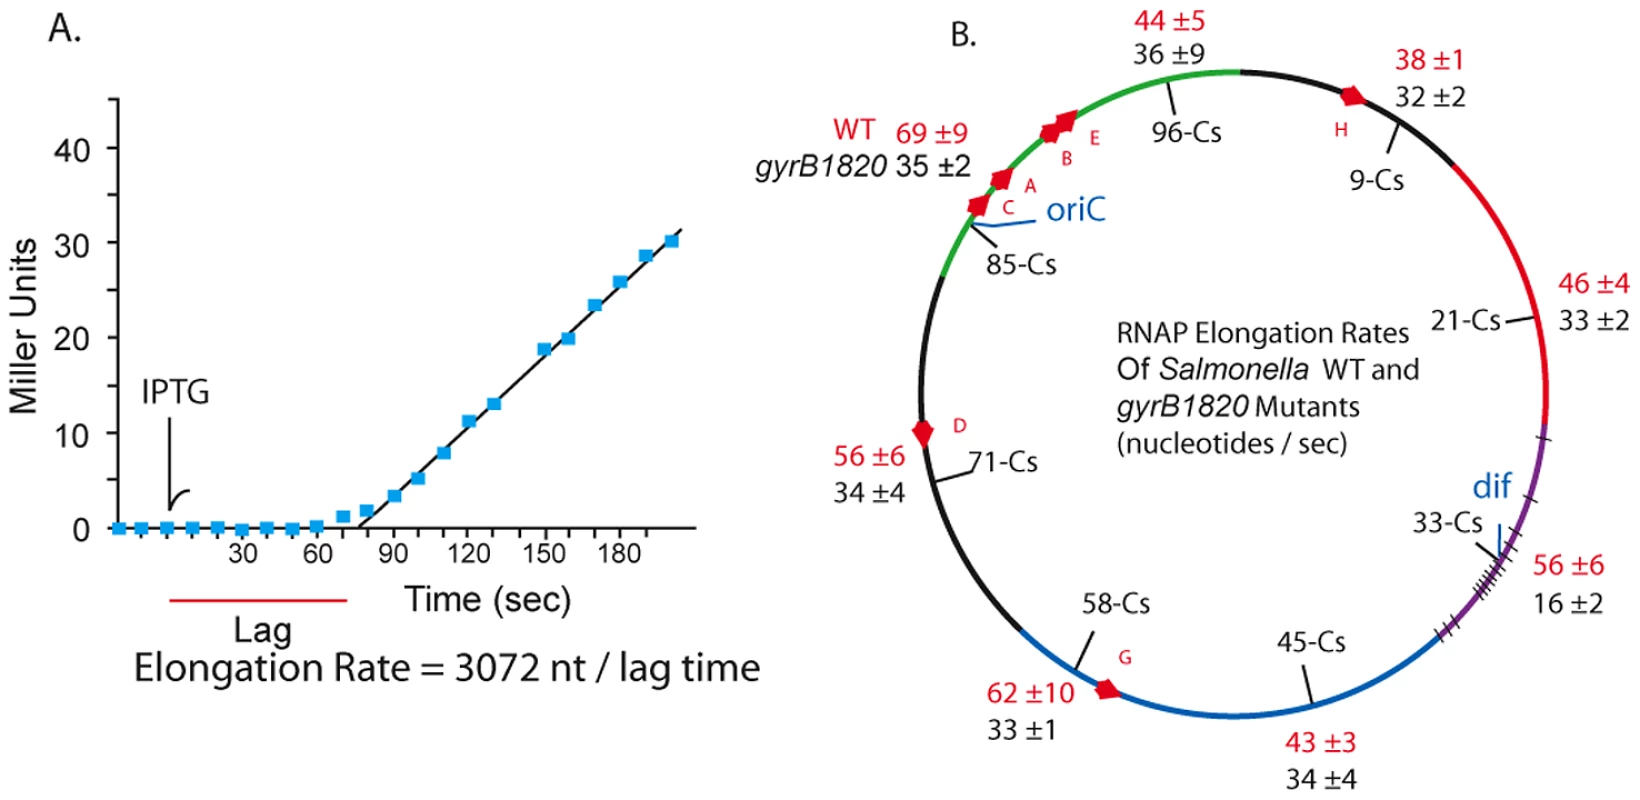 RNAP elongation rates at 8 chromosomal loci in WT (red) and <i>gyrB1820</i> mutant strains (black) are significantly reduced by the GyrB1820 mutation.